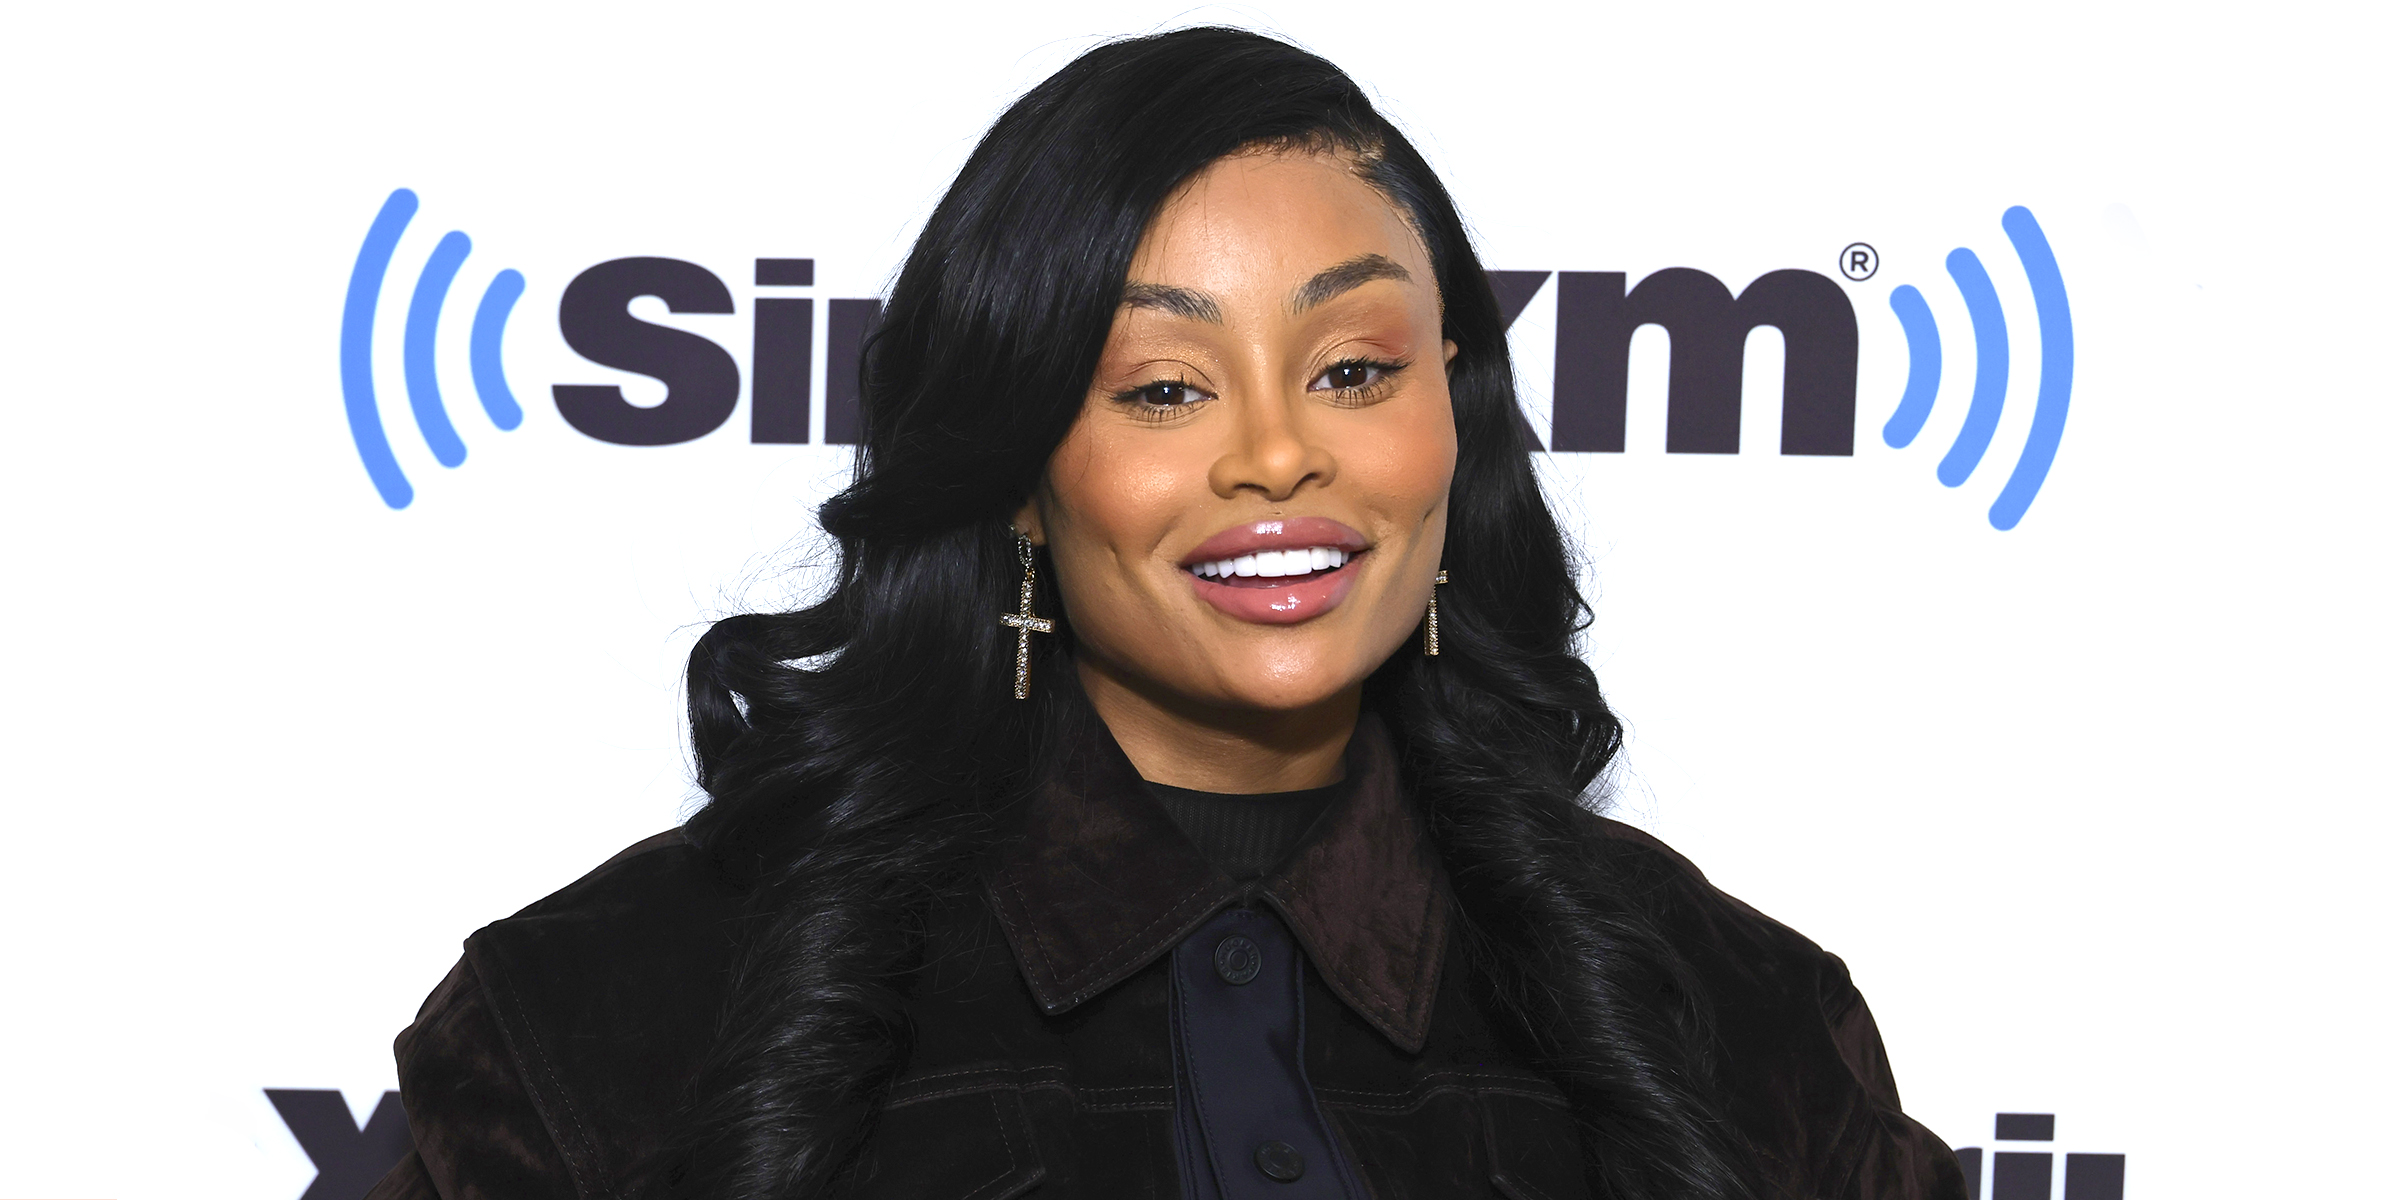 Angela Renée White, aka Blac Chyna, at SiriusXM Studios on March 29, 2023 in New York City. | Source: Getty Images